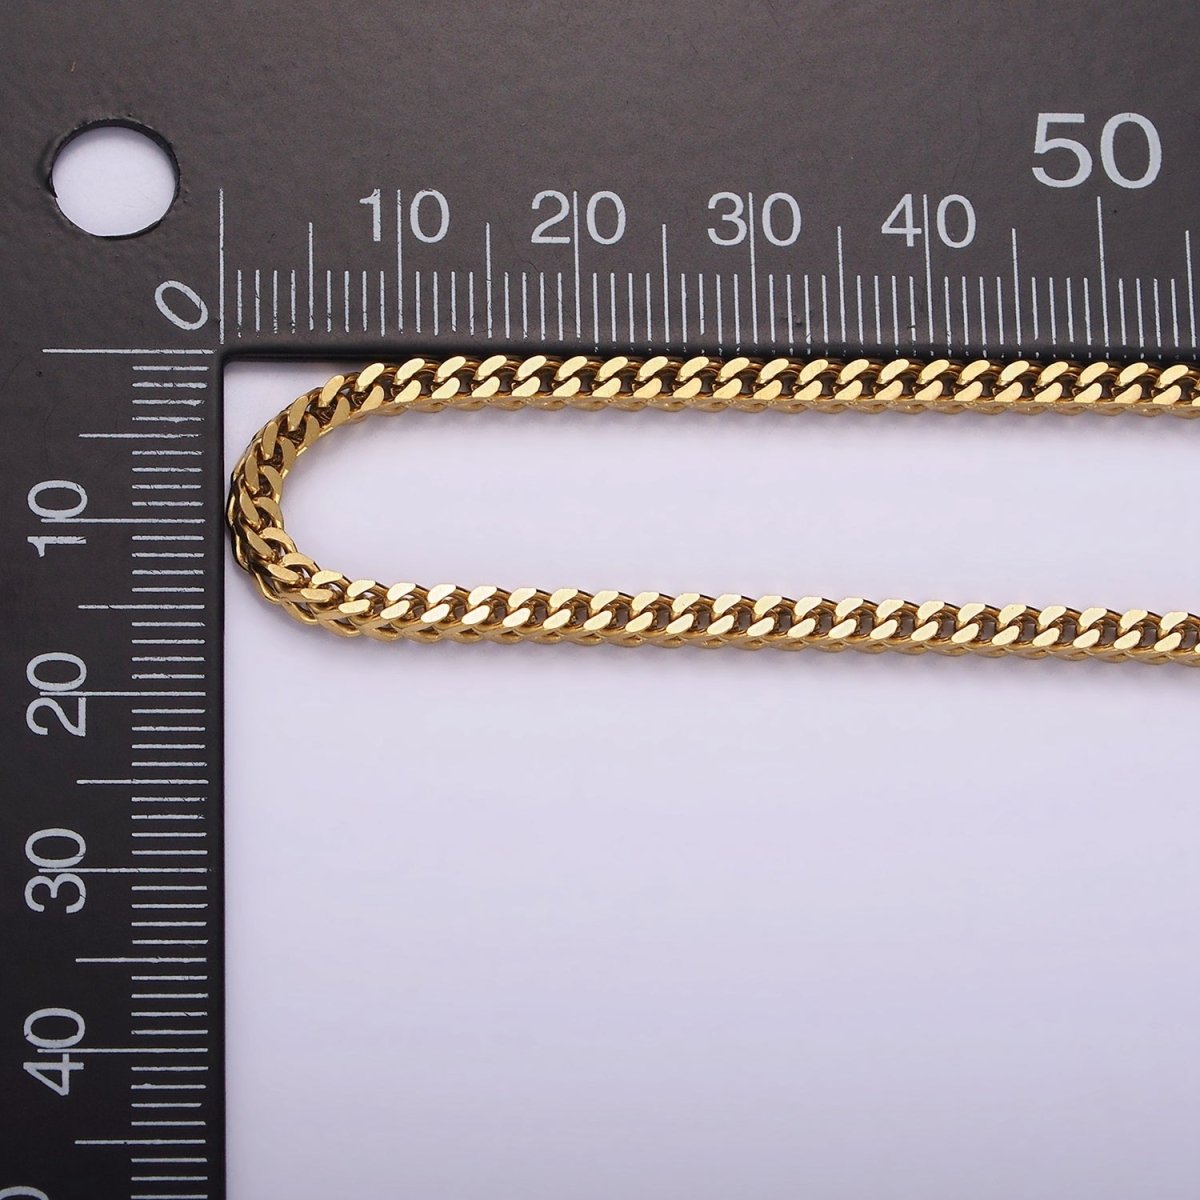 Stainless Steel 2.3mm Concave Curb 18 Inch Chain Necklace | WA-2369 - DLUXCA